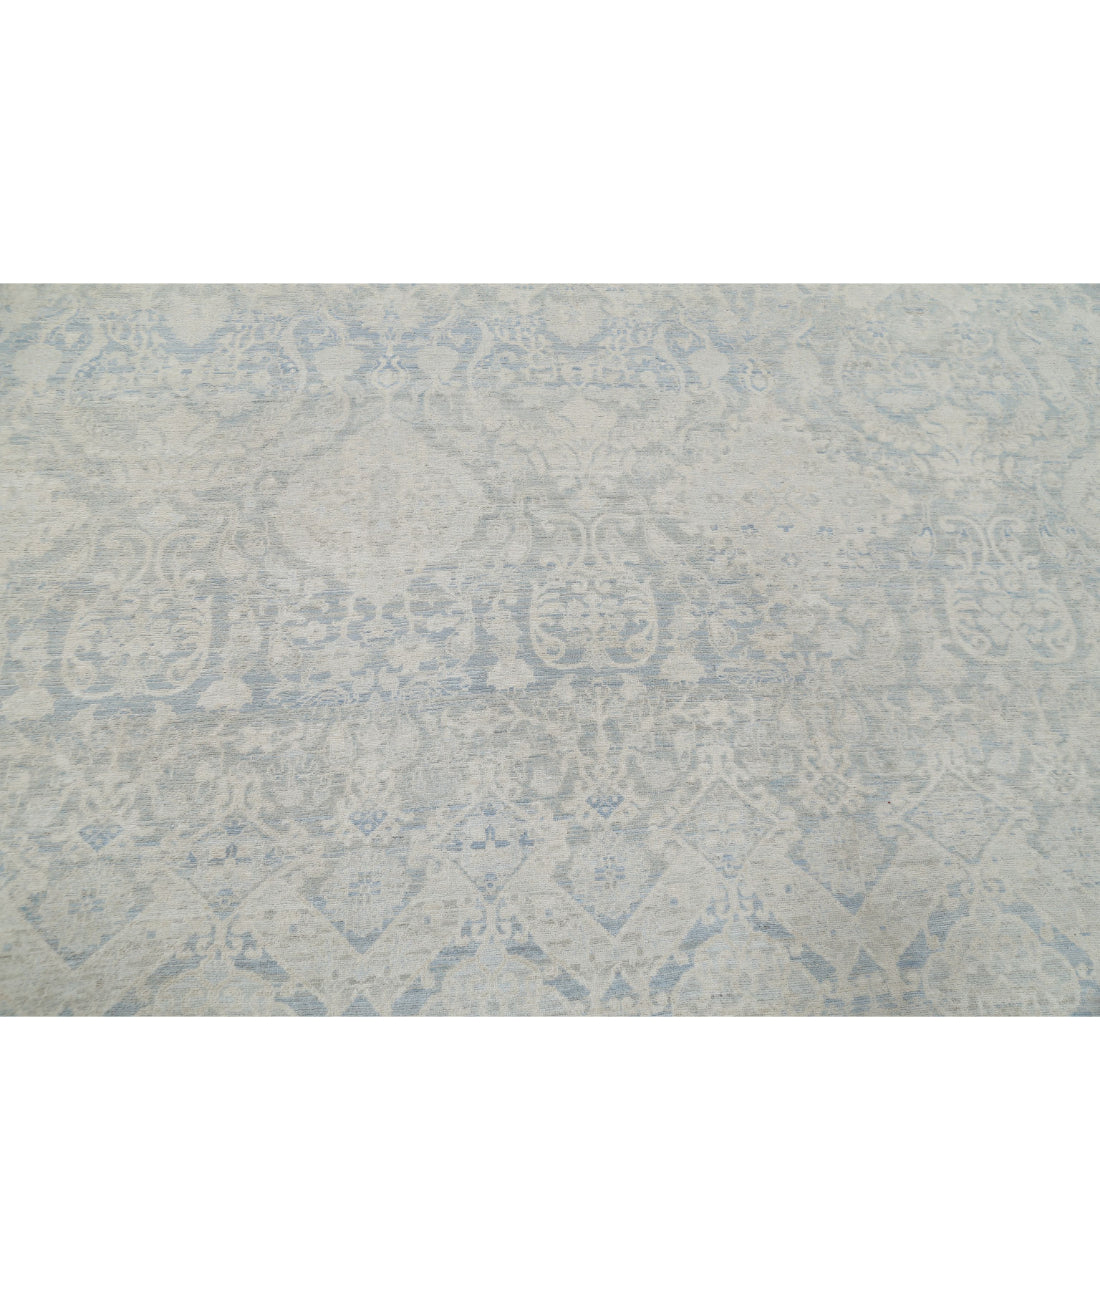 Hand Knotted Artemix Wool Rug - 8'9'' x 12'1'' 8'9'' x 12'1'' (263 X 363) / Blue / Grey